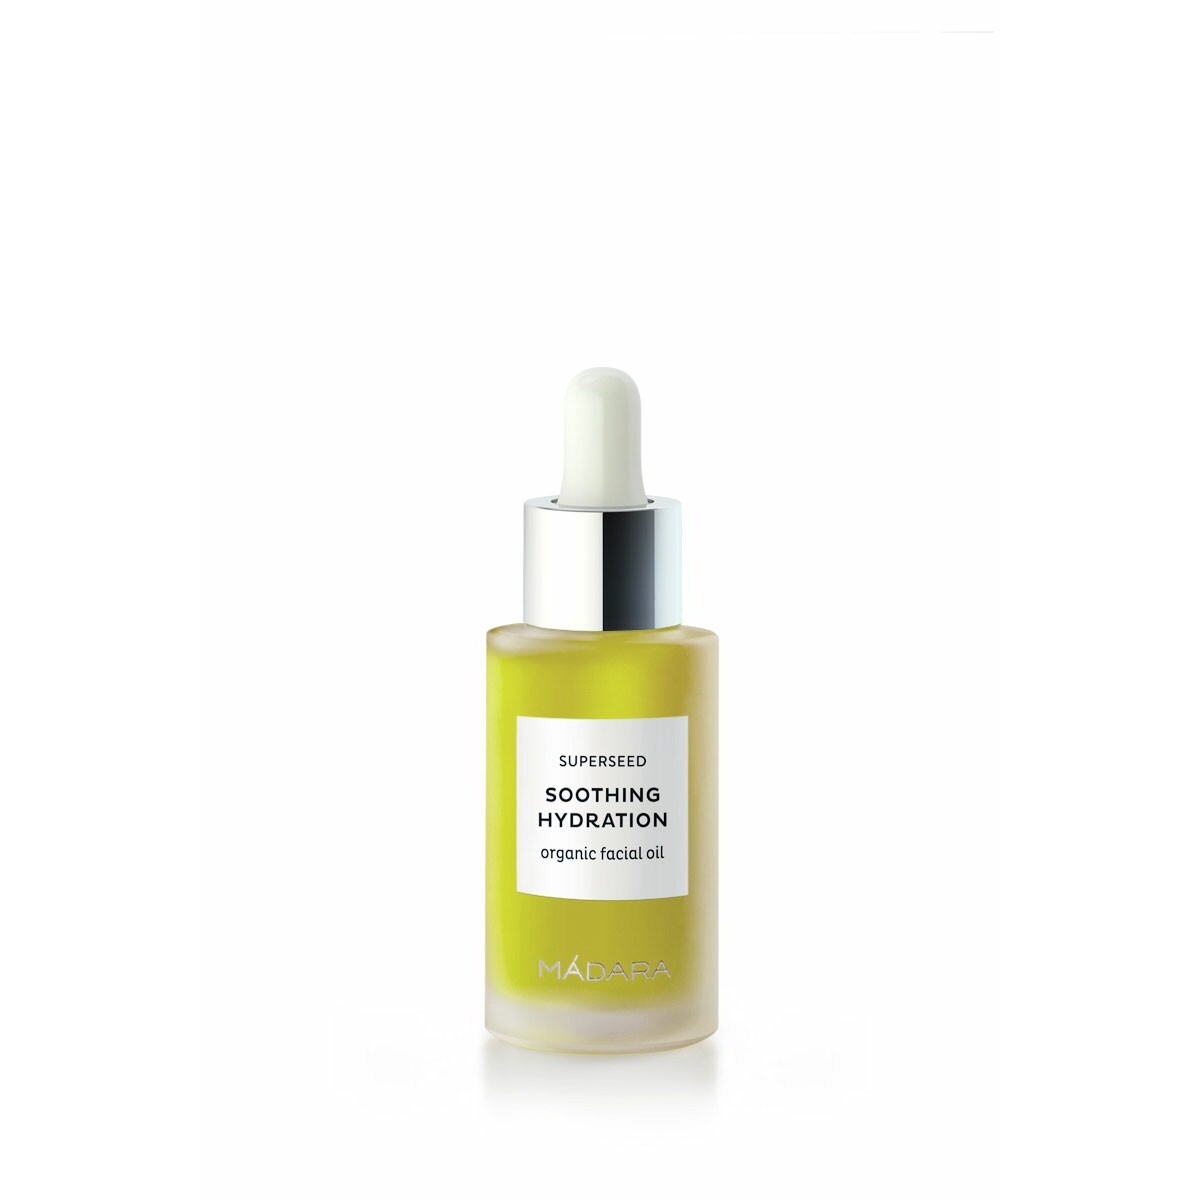 MADARA Superseed Soothing Hydration Facial Oil 30ml